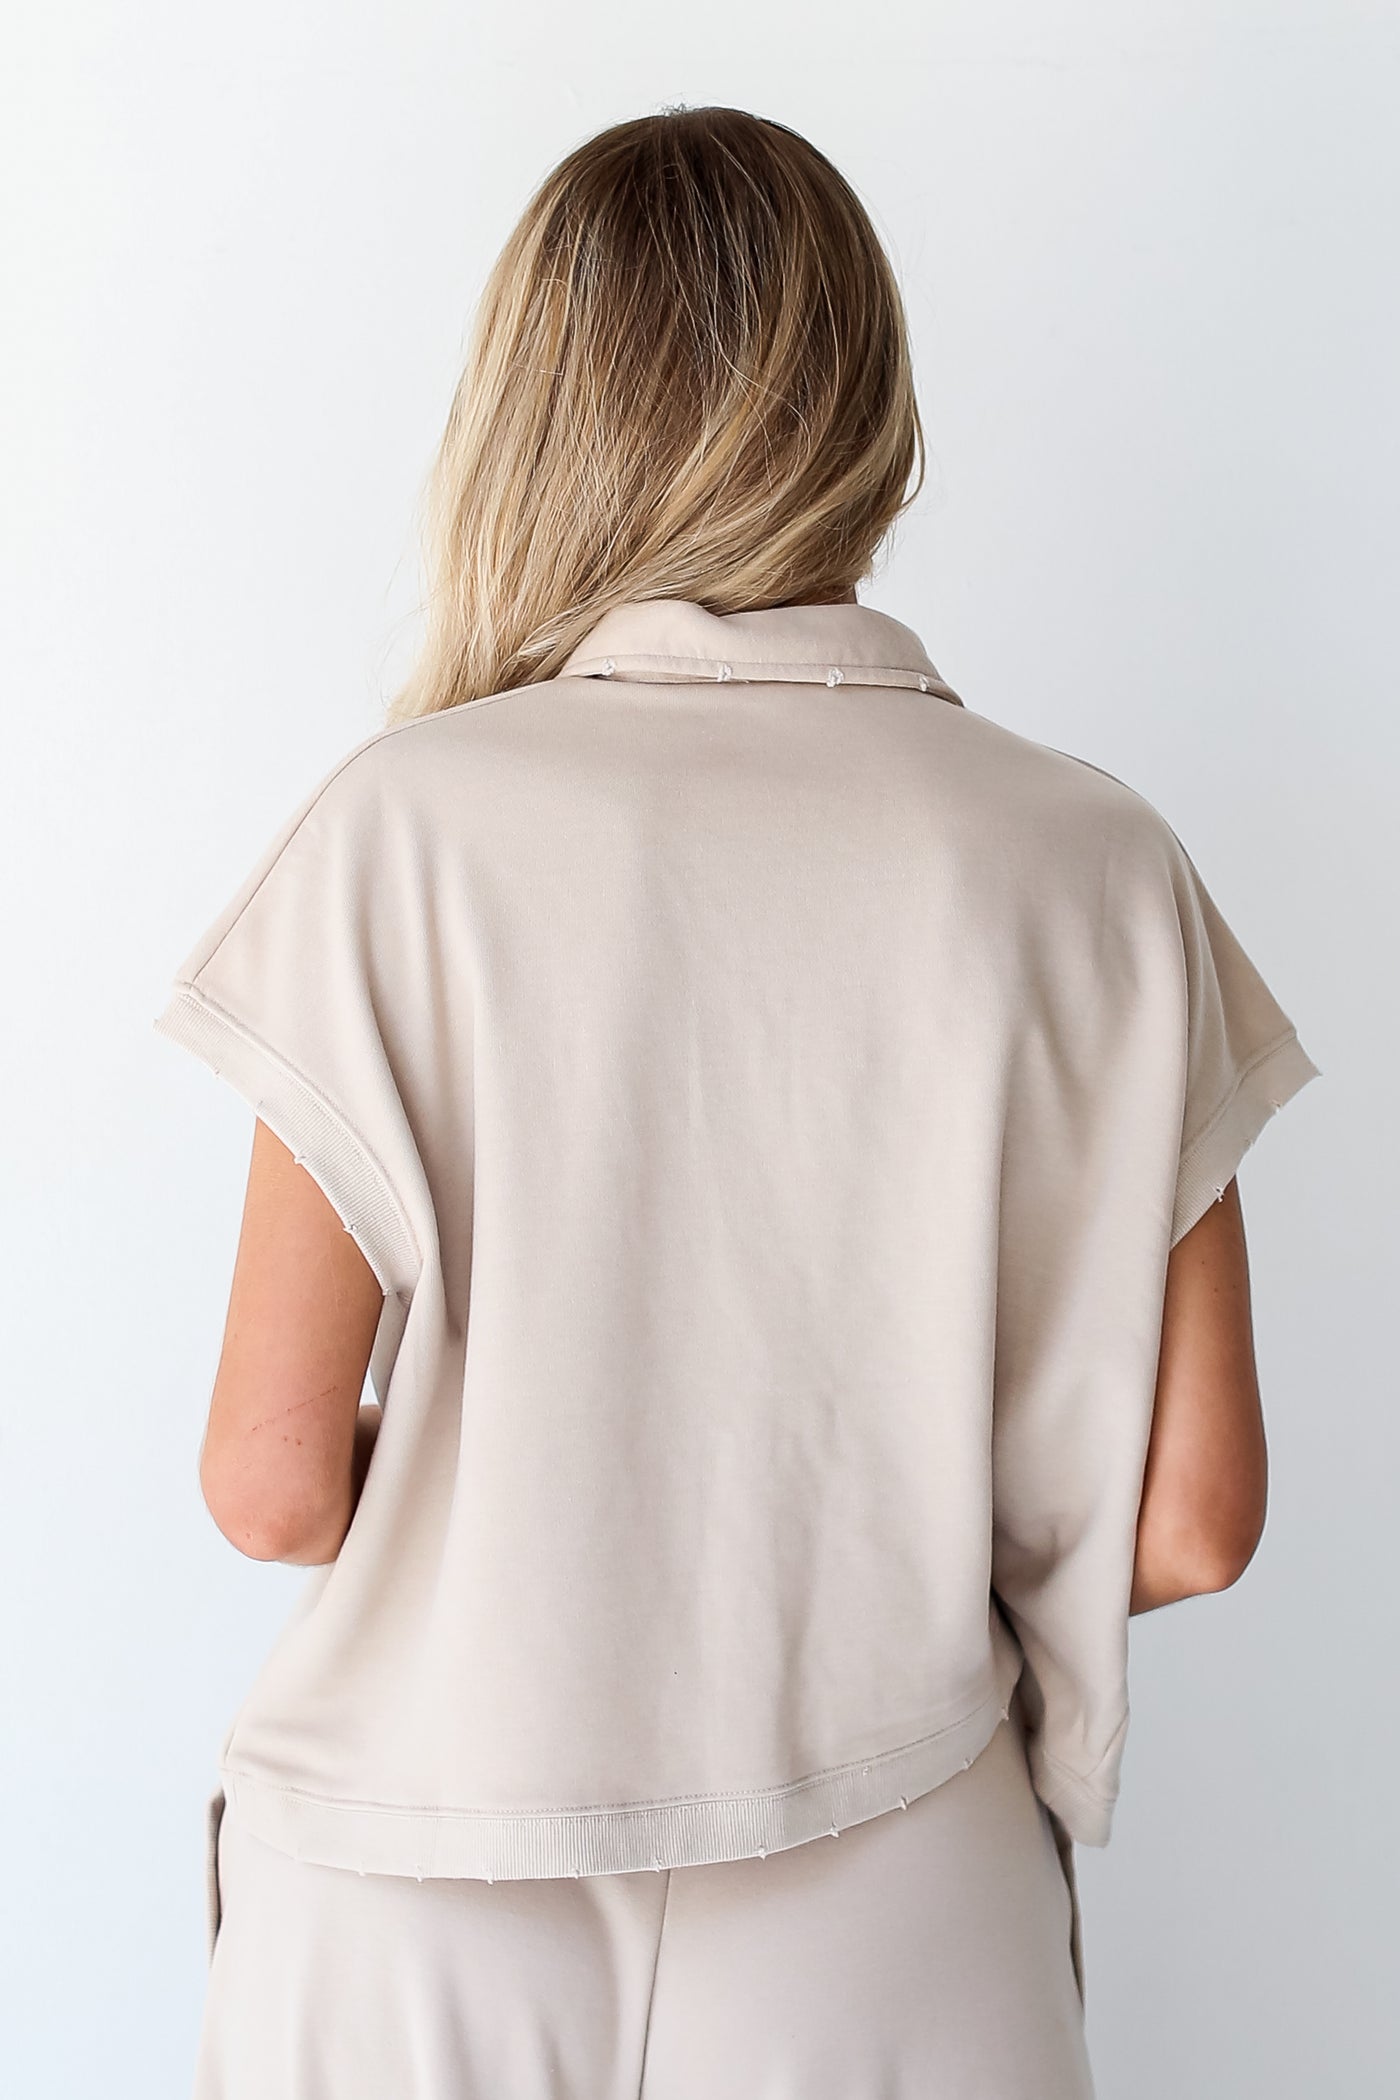 taupe Collared Top back view